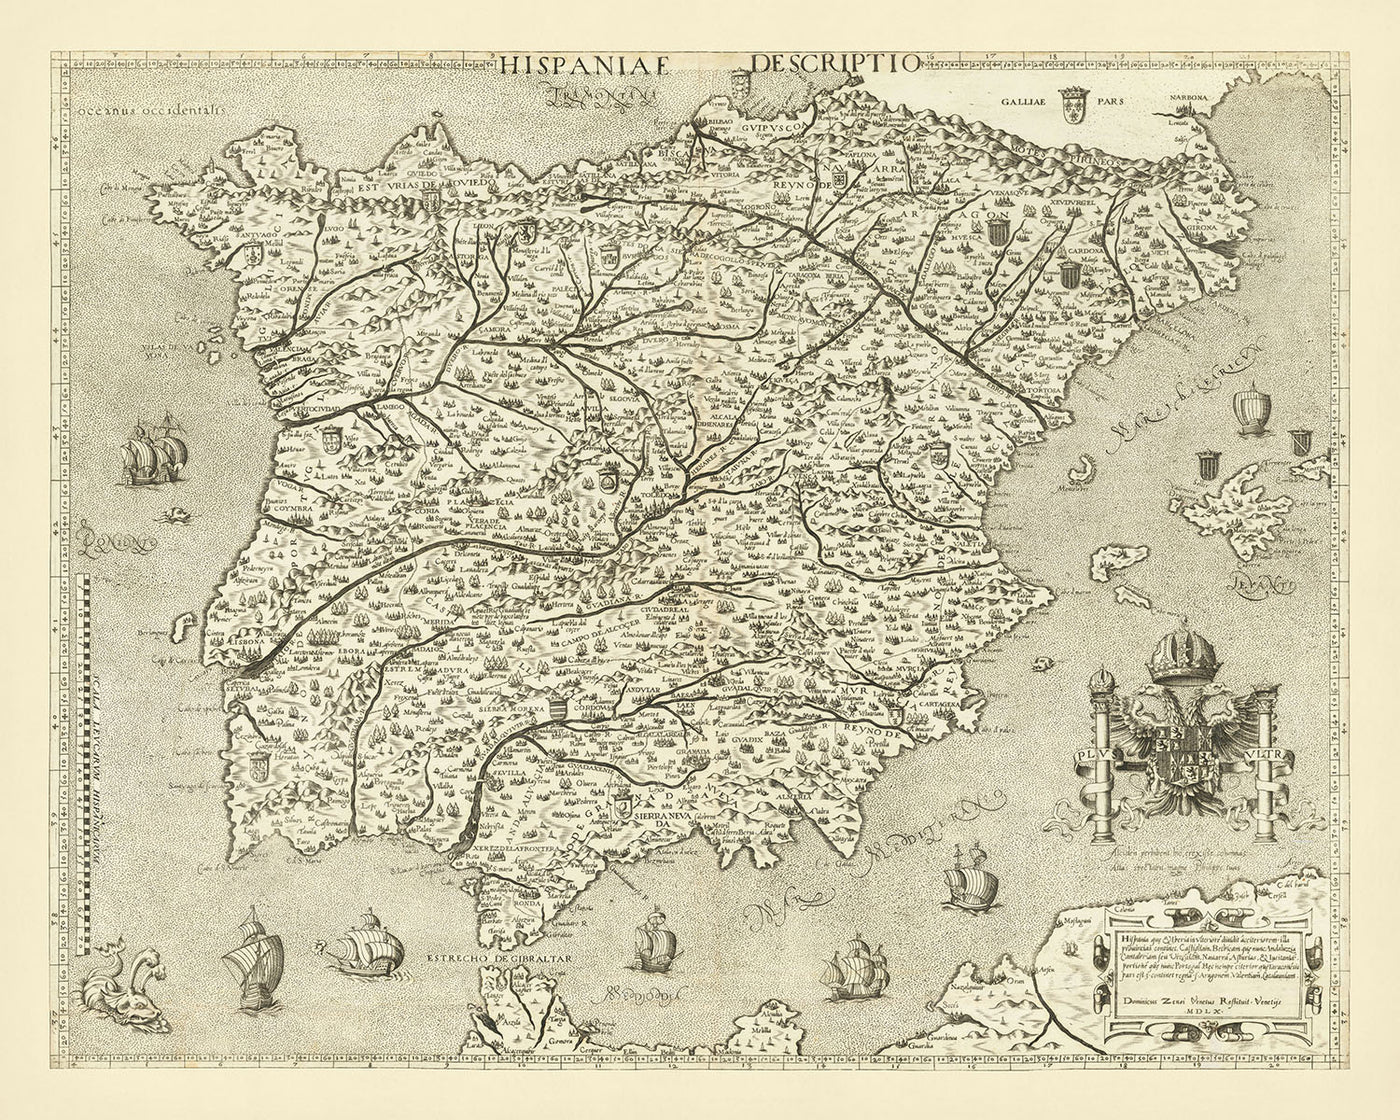 Old Pictorial Map of Spain and Portugal by Zenoi, 1560: Pillars of Hercules, Sevilla, Lisboa, Pyrenees, Sea Monsters